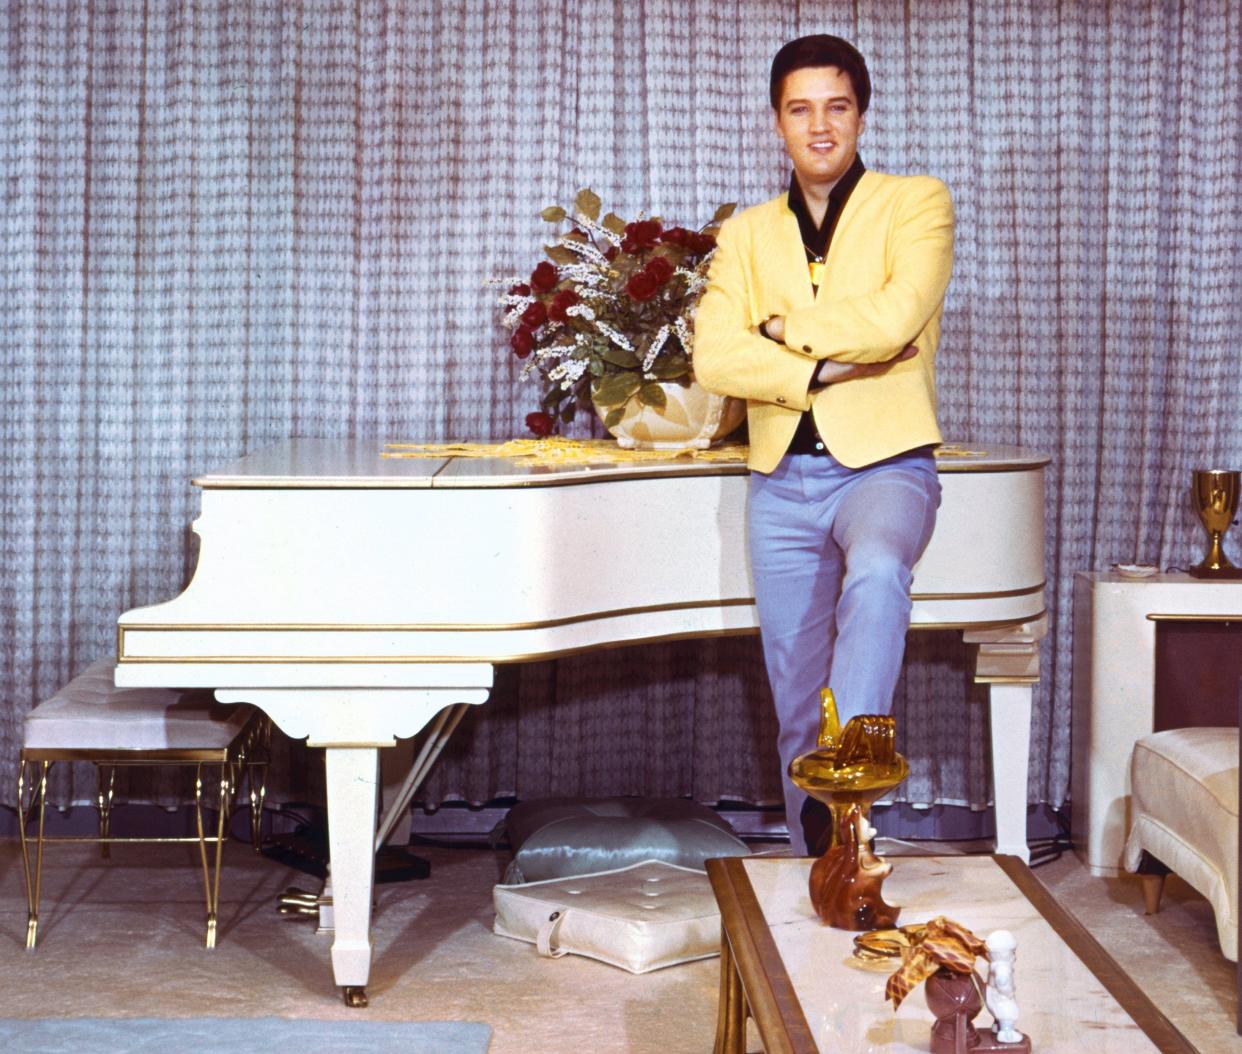 Elvis Presley stands beside his piano at Graceland in this 1965 photograph. Elvis had misgivings about allowing pictures to be taken in his home. "It's not that I don't want pictures," he said. "You know what I mean. Some people might think I am looking for publicity or trying to exploit my home. I certainly don't want anyone to think that."